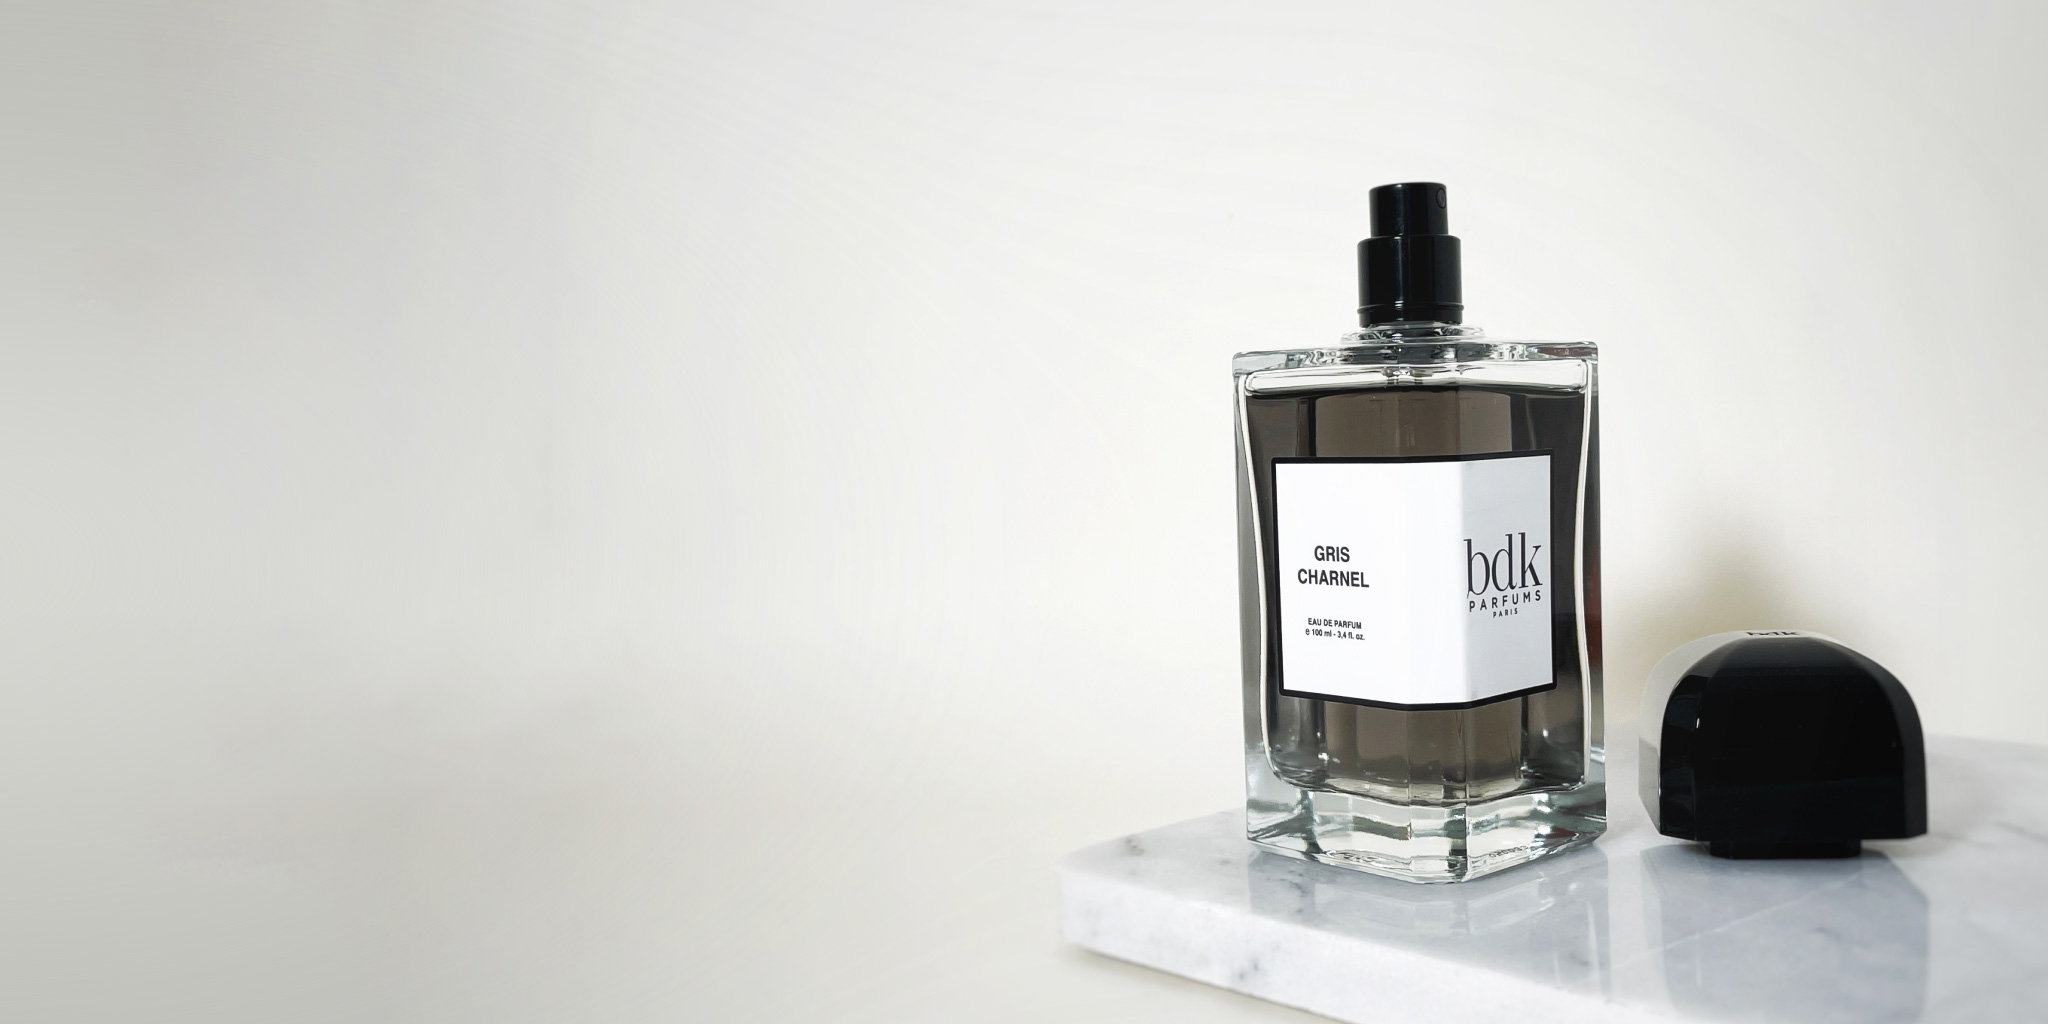 Review: BDK Parfums Gris Charnel – Waxy Beauty